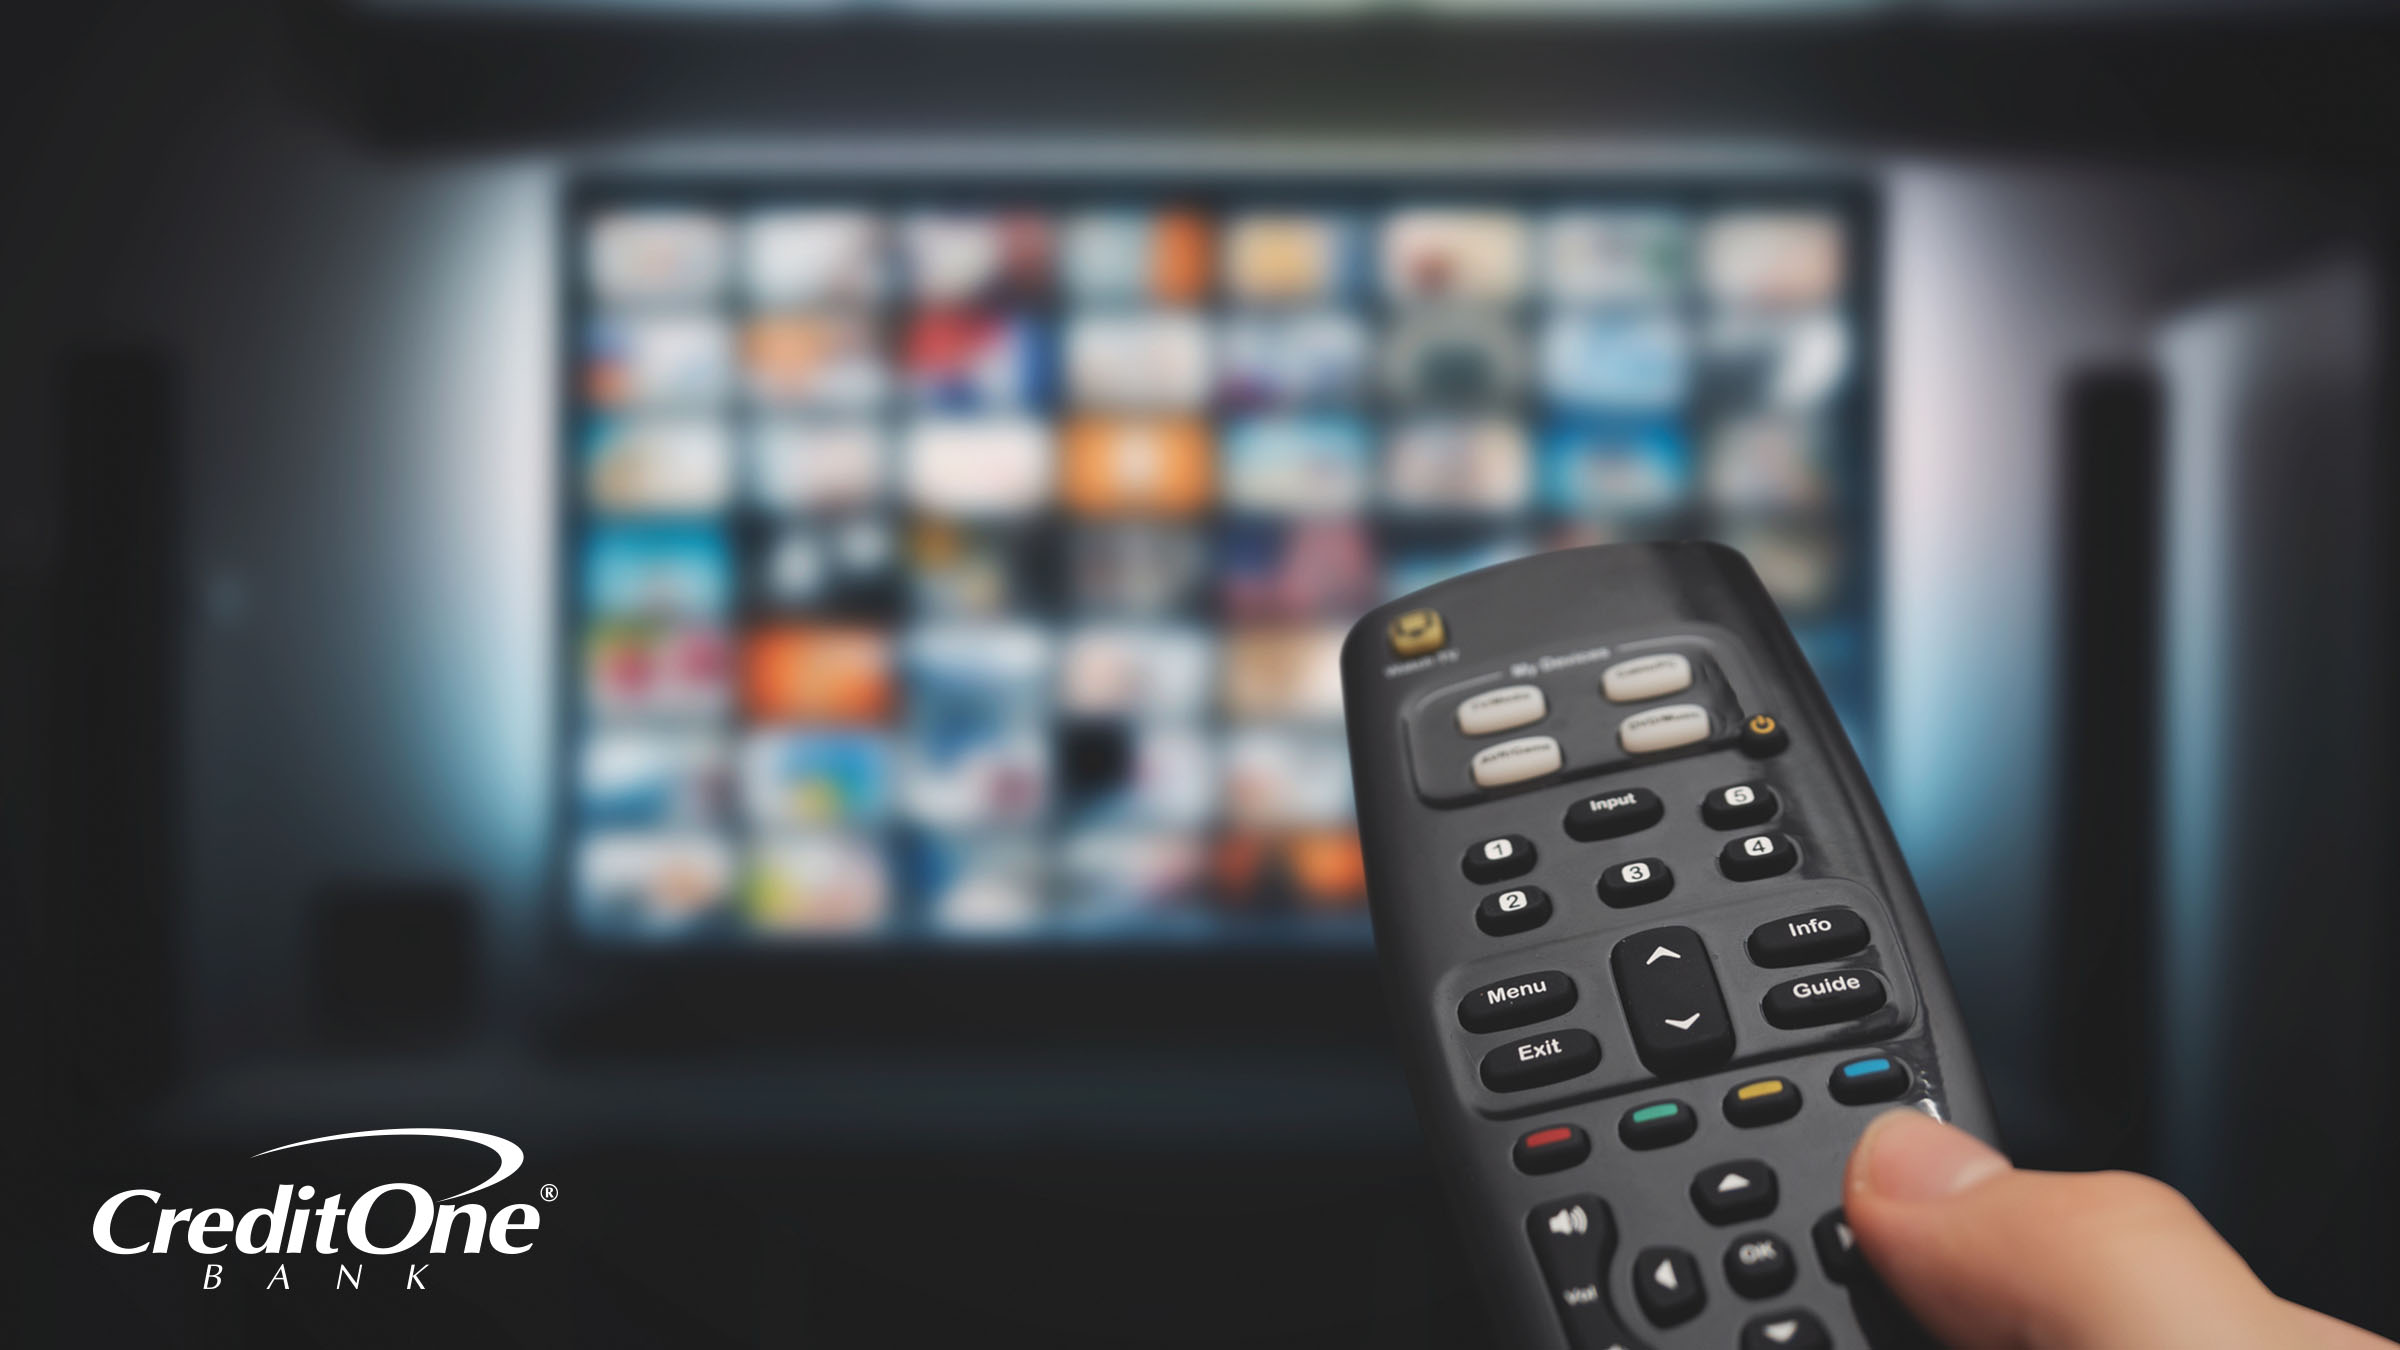 A man’s hand uses a remote to navigate various subscription services on a smart TV, which could impact his personal finances.